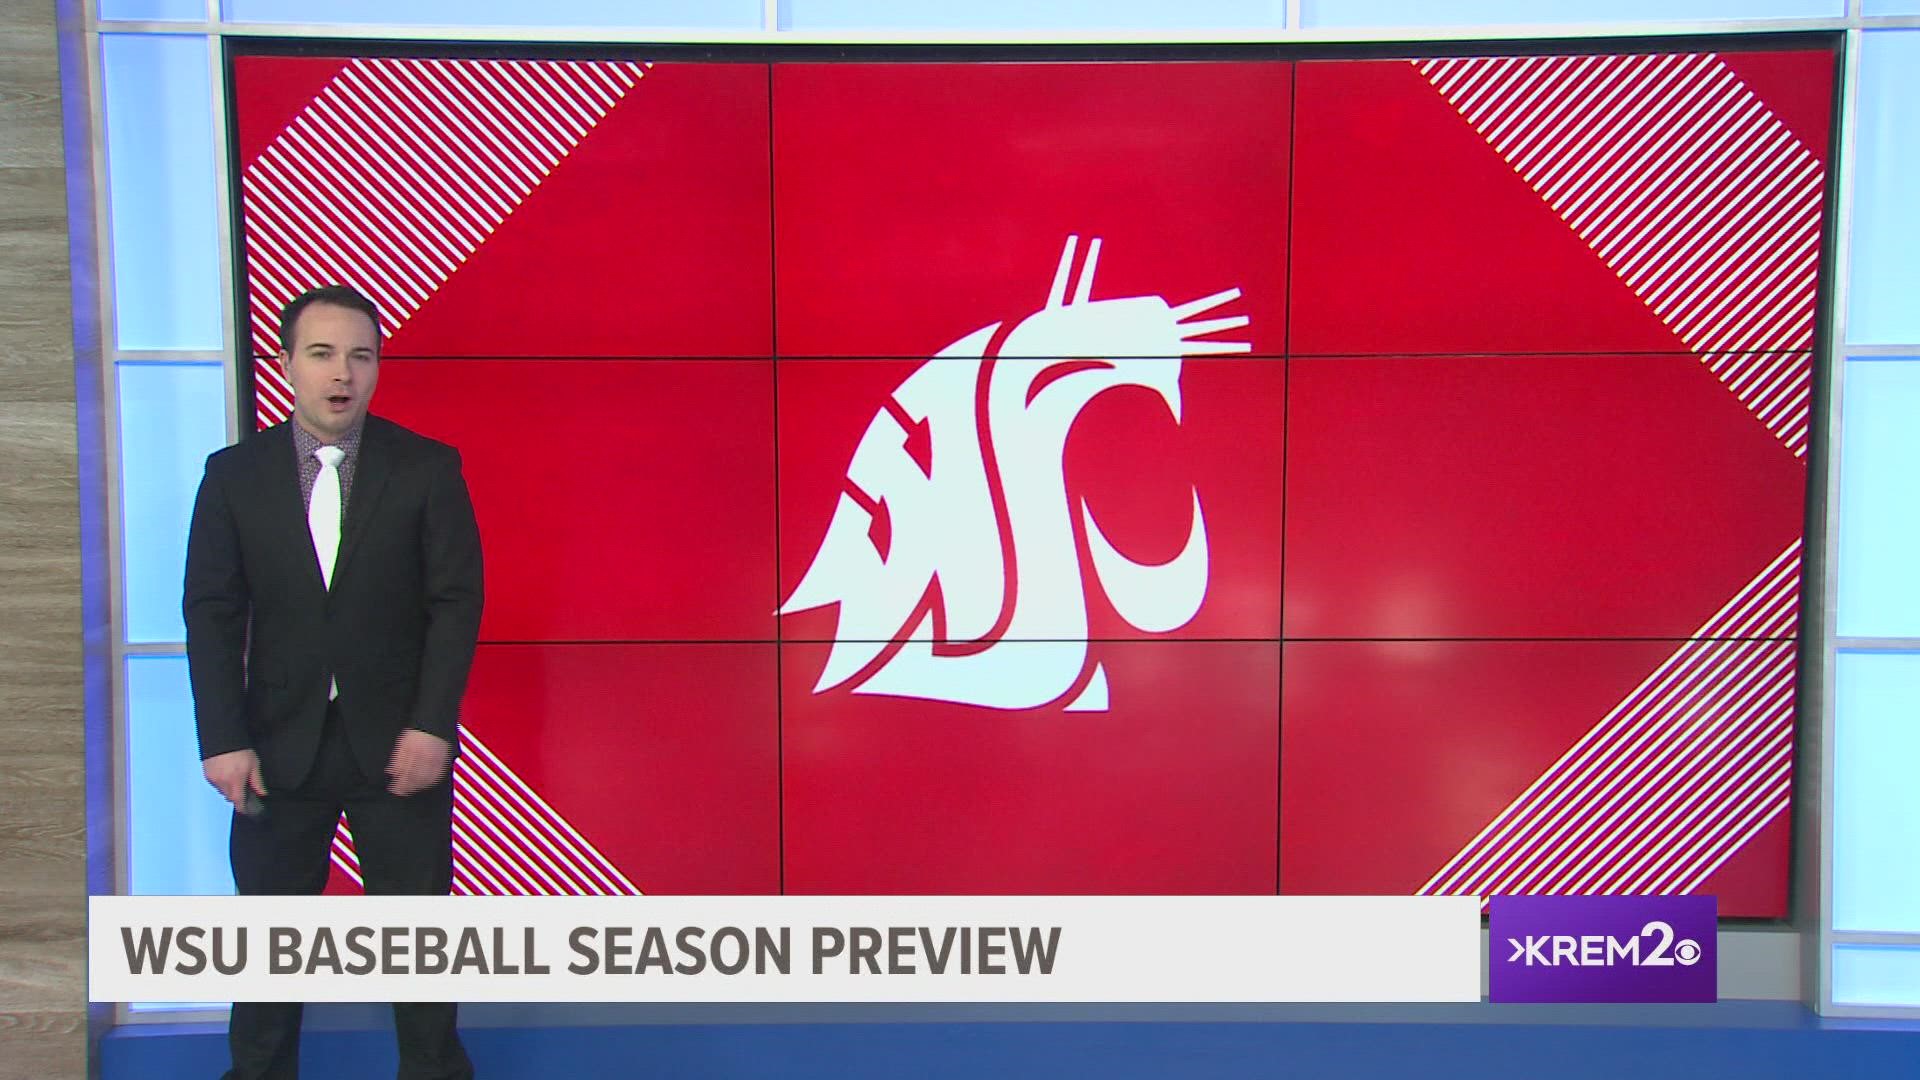 The Cougs were picked to finish the season in 9th place in the Pac-12 preseason coaches poll. However, they are confident they will be a surprise team.